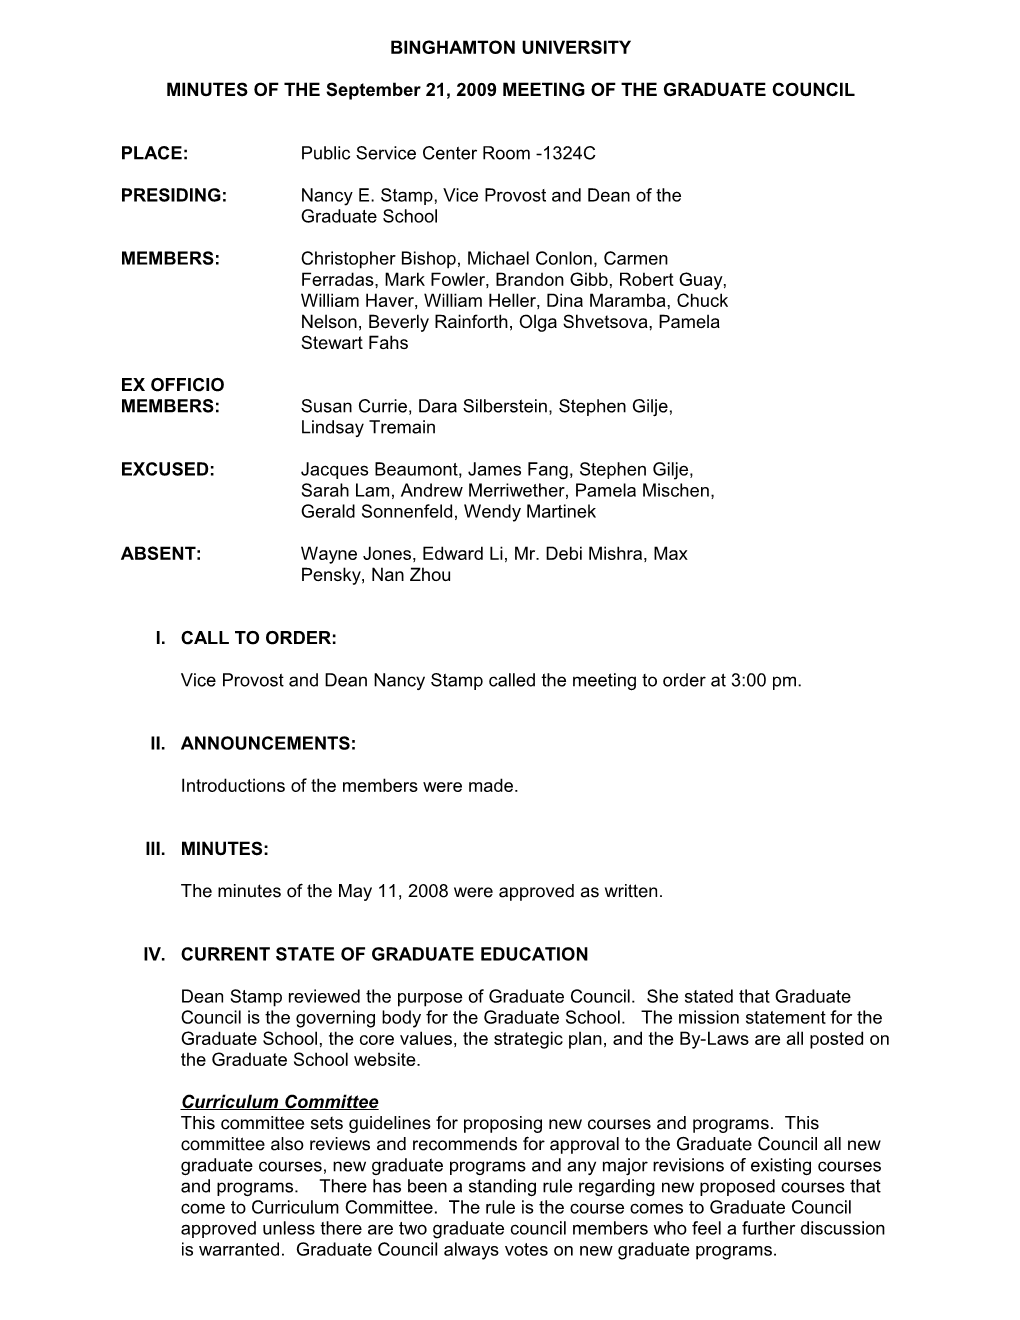 MINUTES of the September 21, 2009MEETING of the GRADUATE COUNCIL